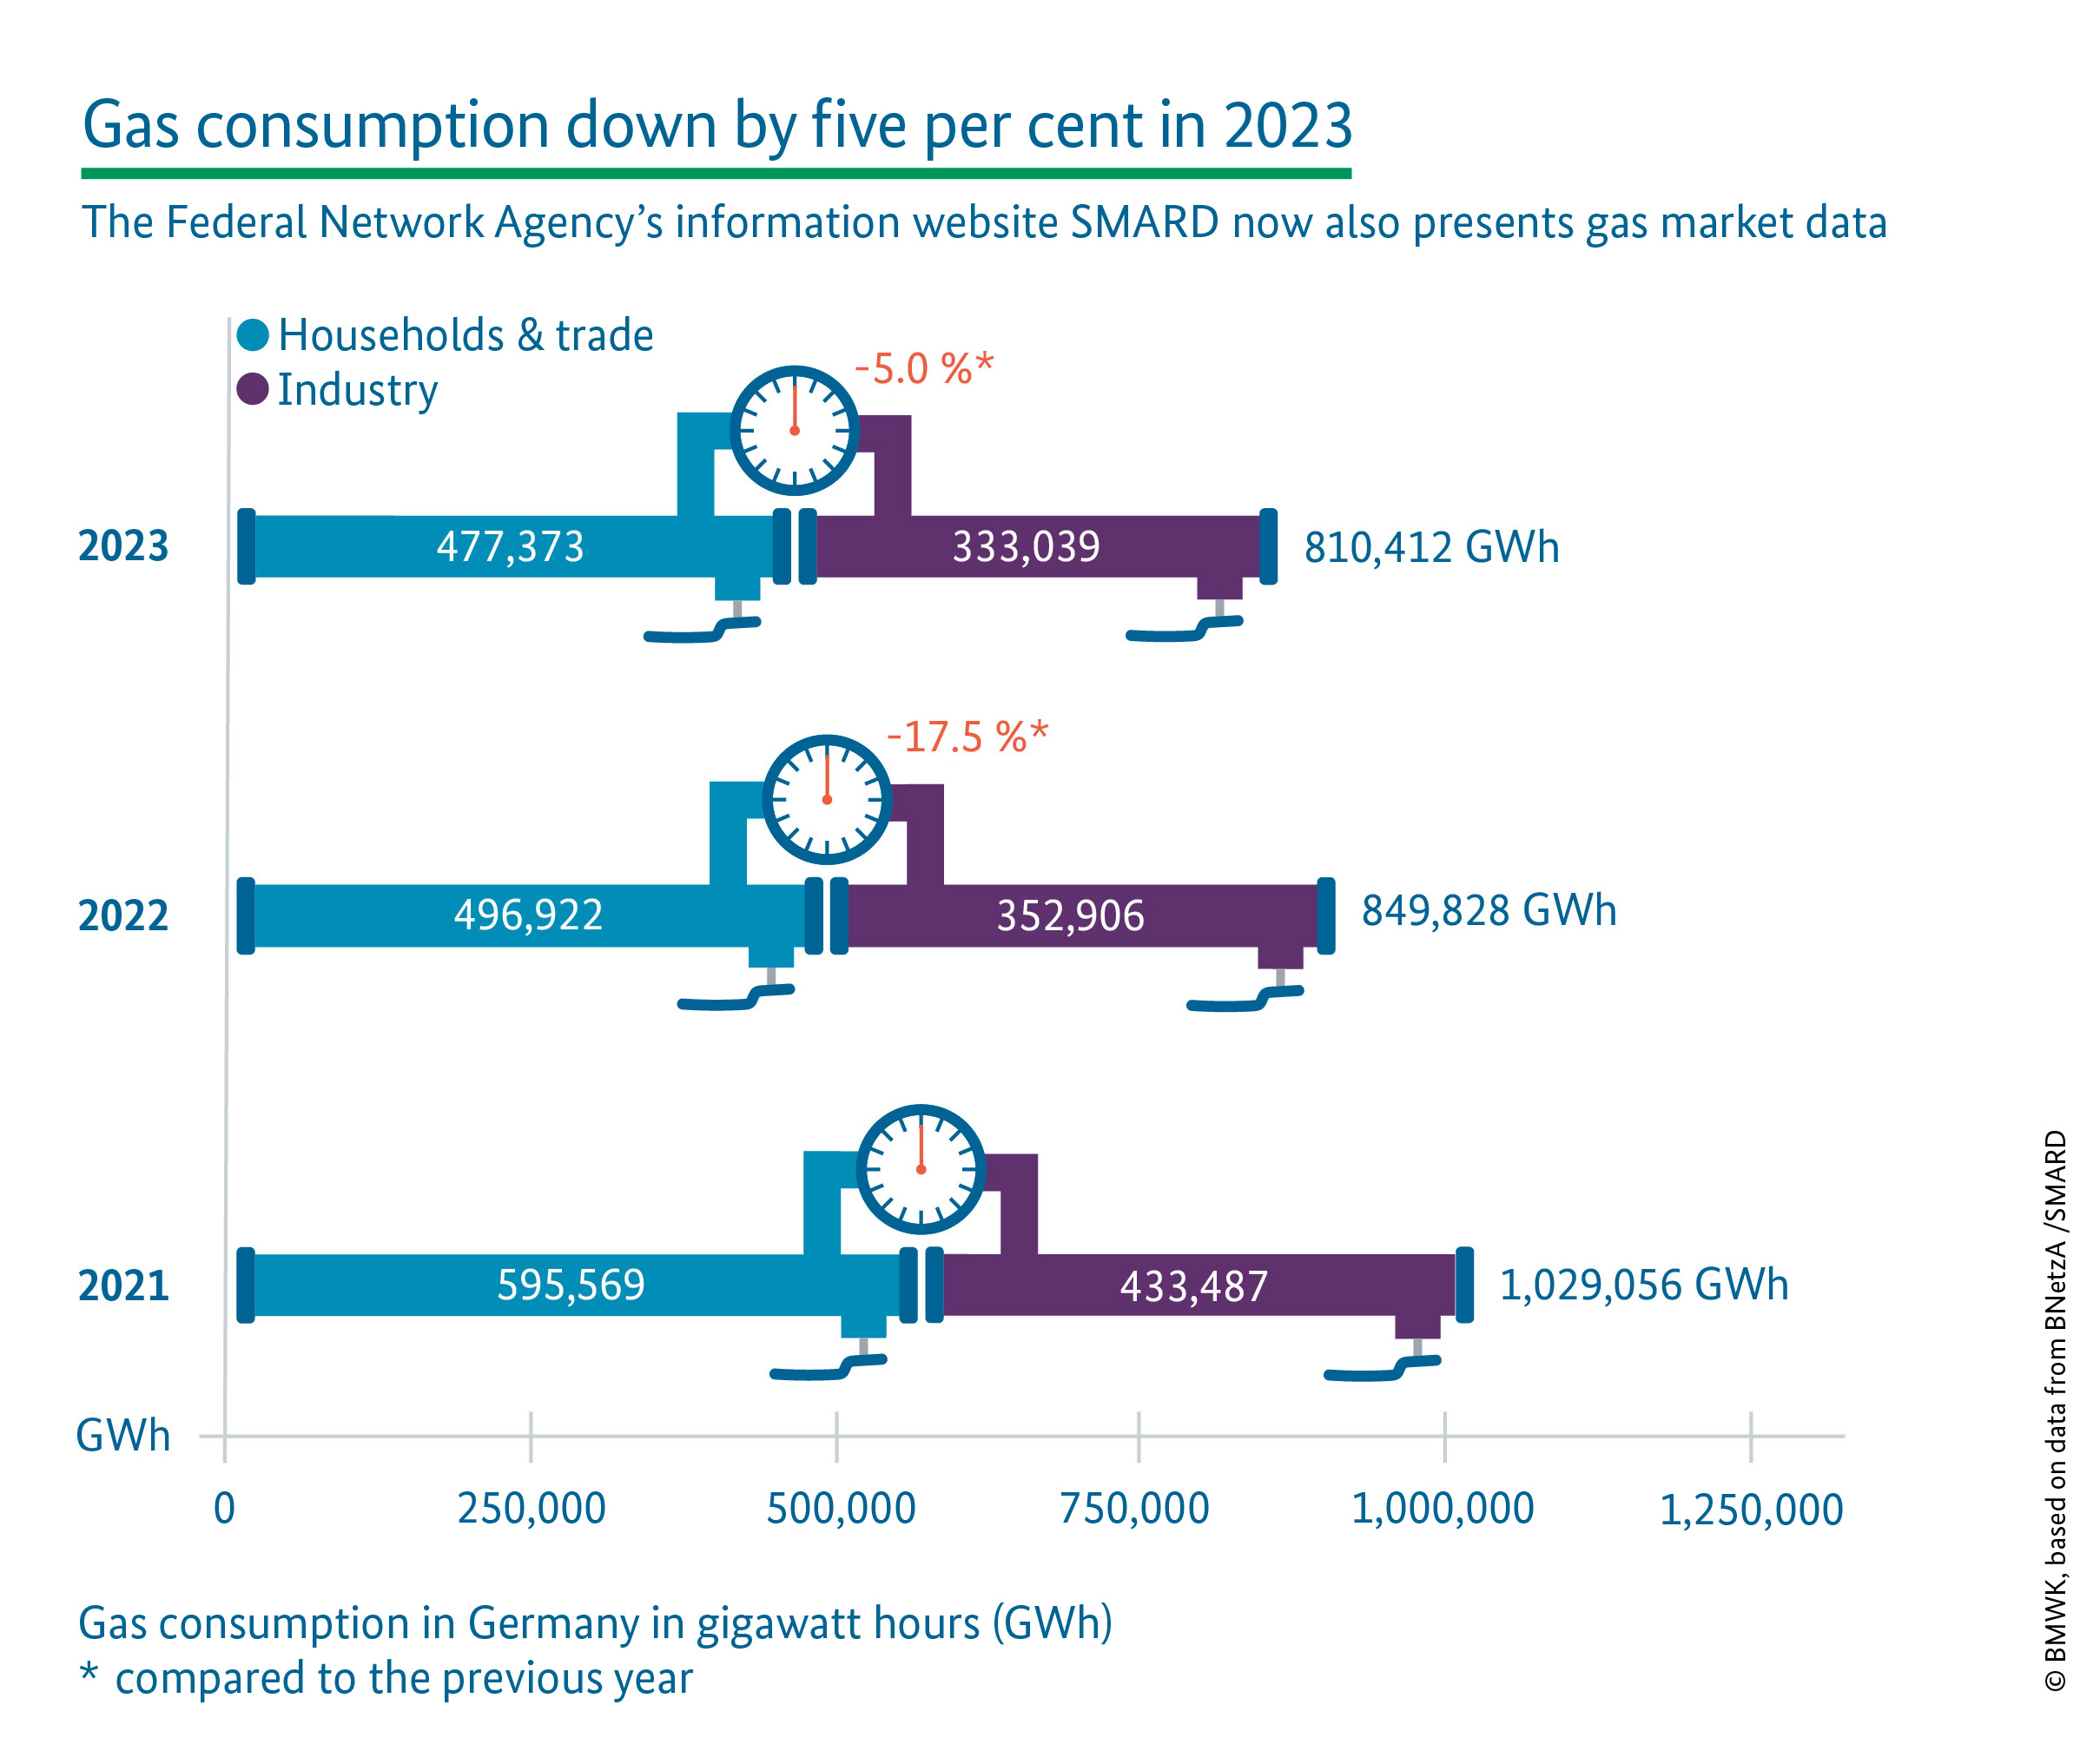 Gas consumption in Germany continues to fall